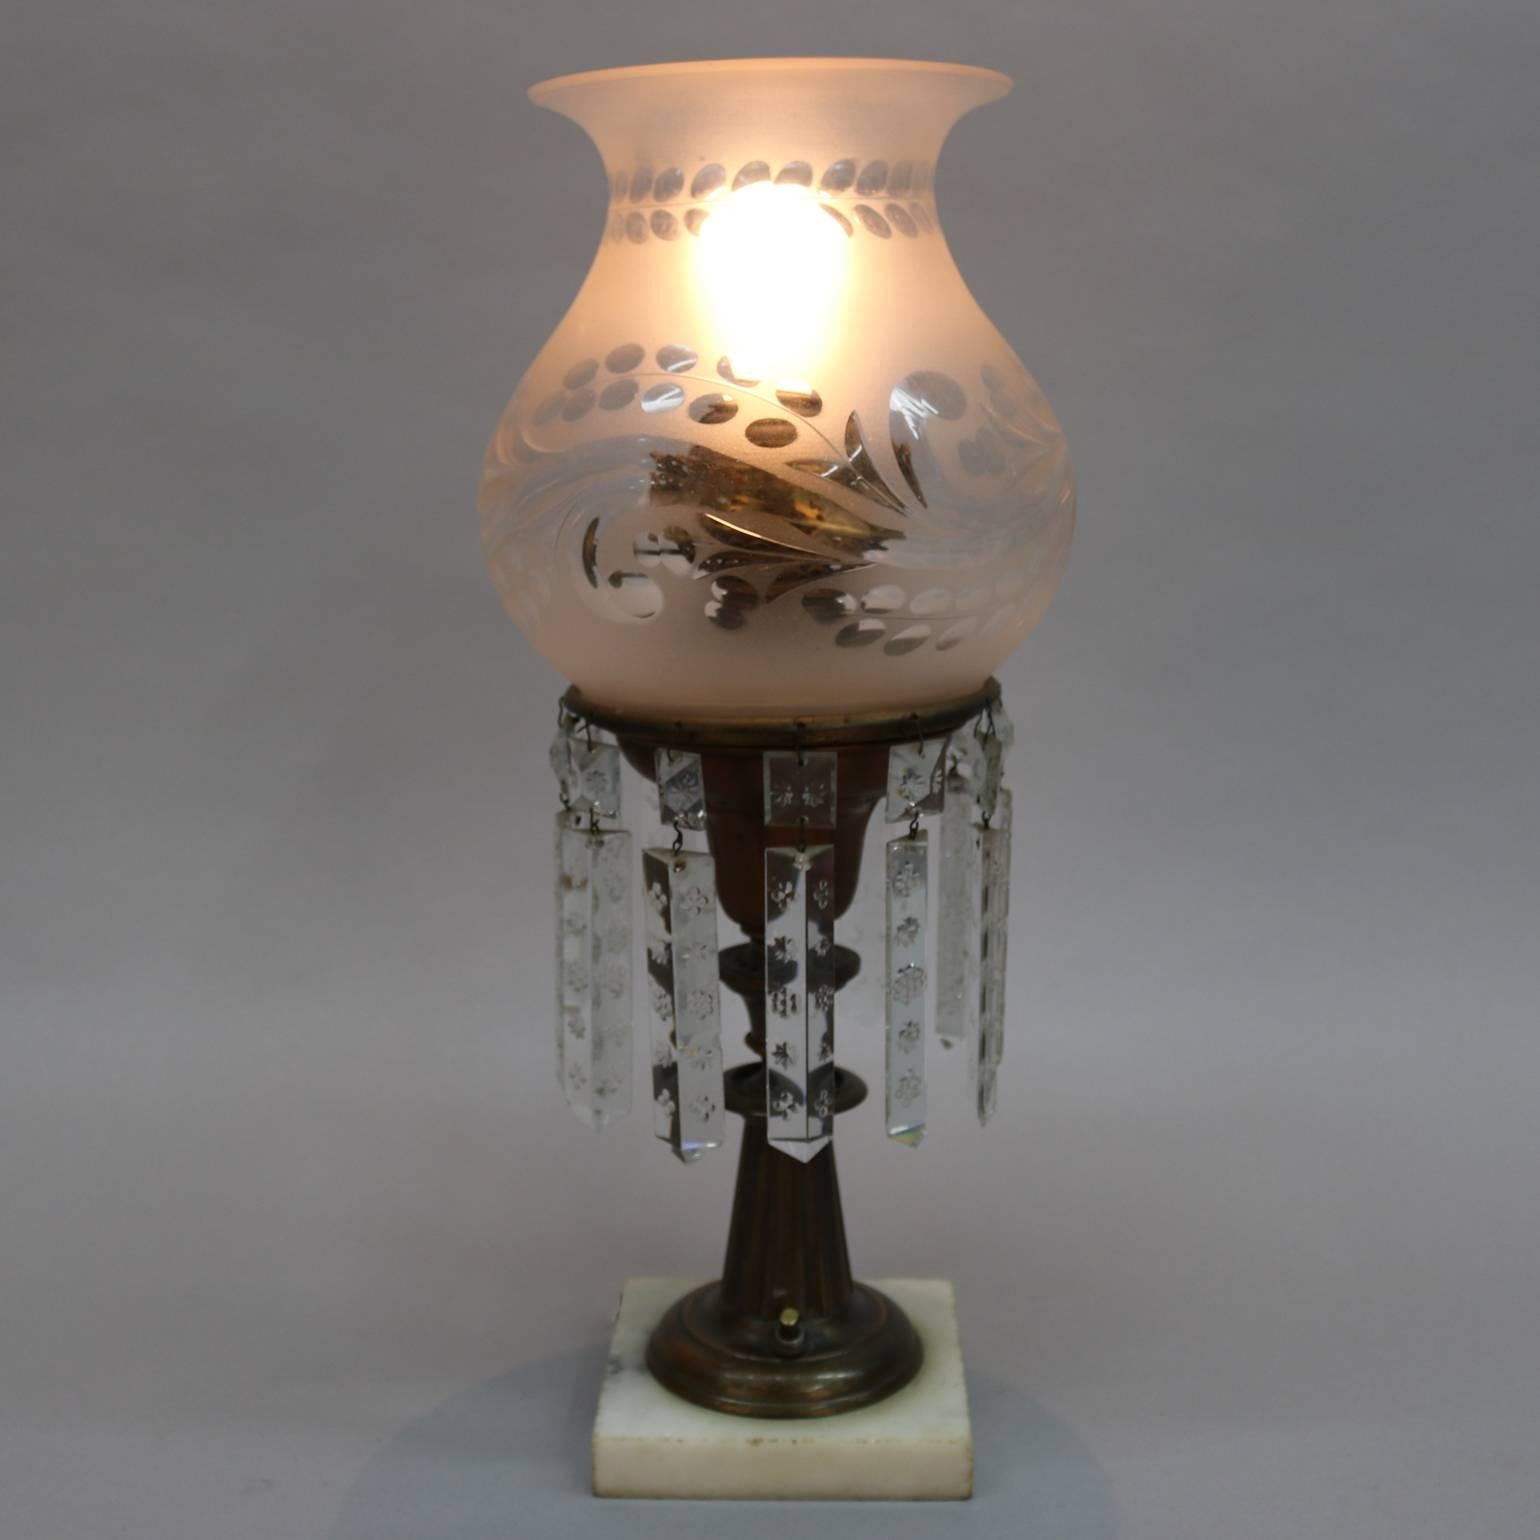 Antique brass electrified solar table lamp features gilt bronze base, floral decorated cut crystal prisms, etched shade, and THE ARCTIC MB CO. N.Y. single wick burner, 19th century

Measures: 17